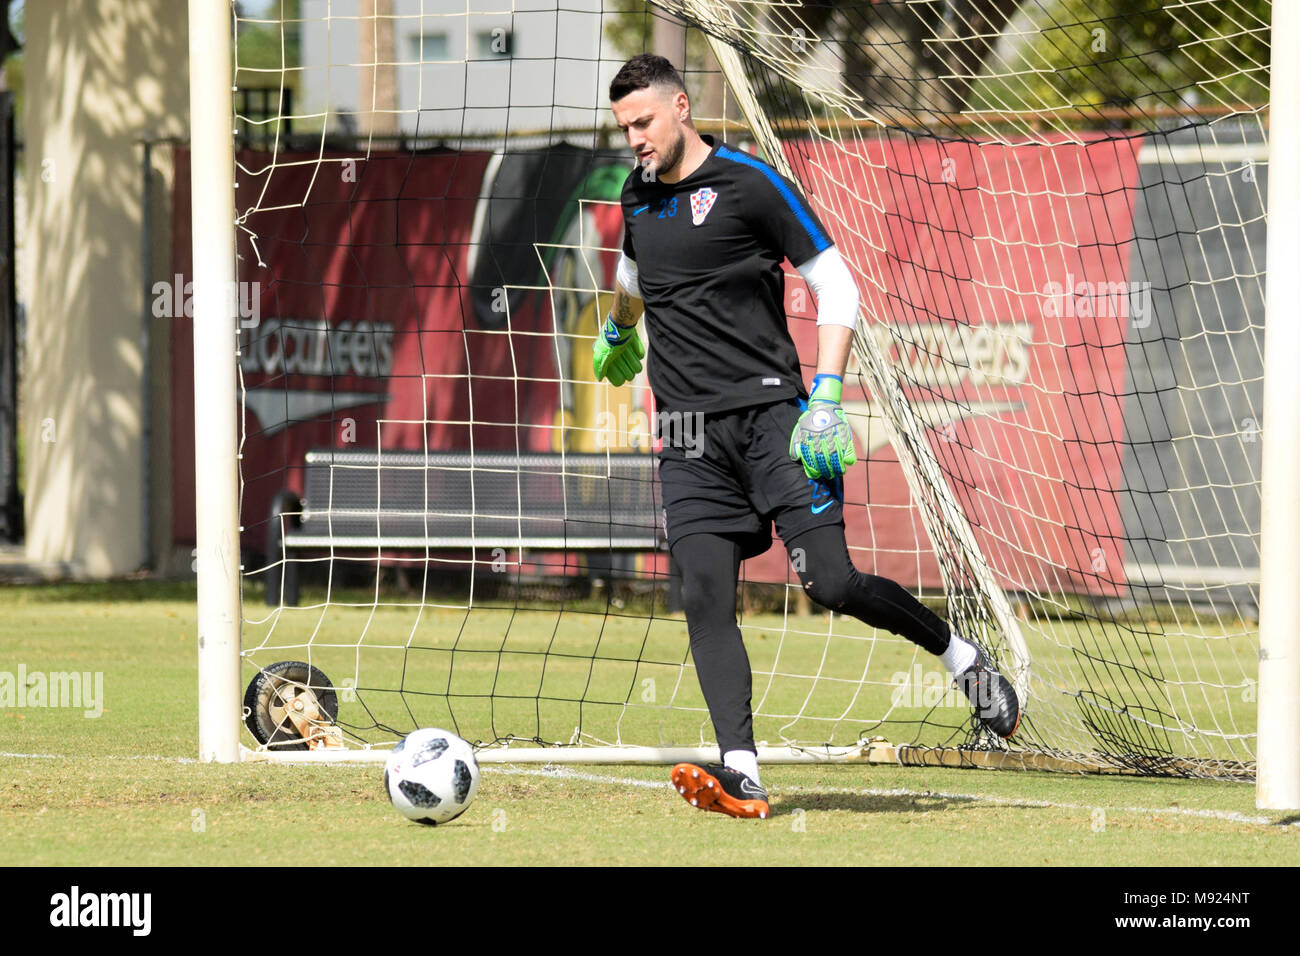 Miami, Florida, USA. 21st Mar, 2018. Daniel Subasic goalkeeper with 35 appearances with the Croatia national team plays ball in the morning training at Barry University.The Croatia national football team will play a friendly match against Peru on Friday at 23 March at the Hard Rock Cafe Stadium in the city of Miami. Credit: Fernando Oduber/SOPA Images/ZUMA Wire/Alamy Live News Stock Photo